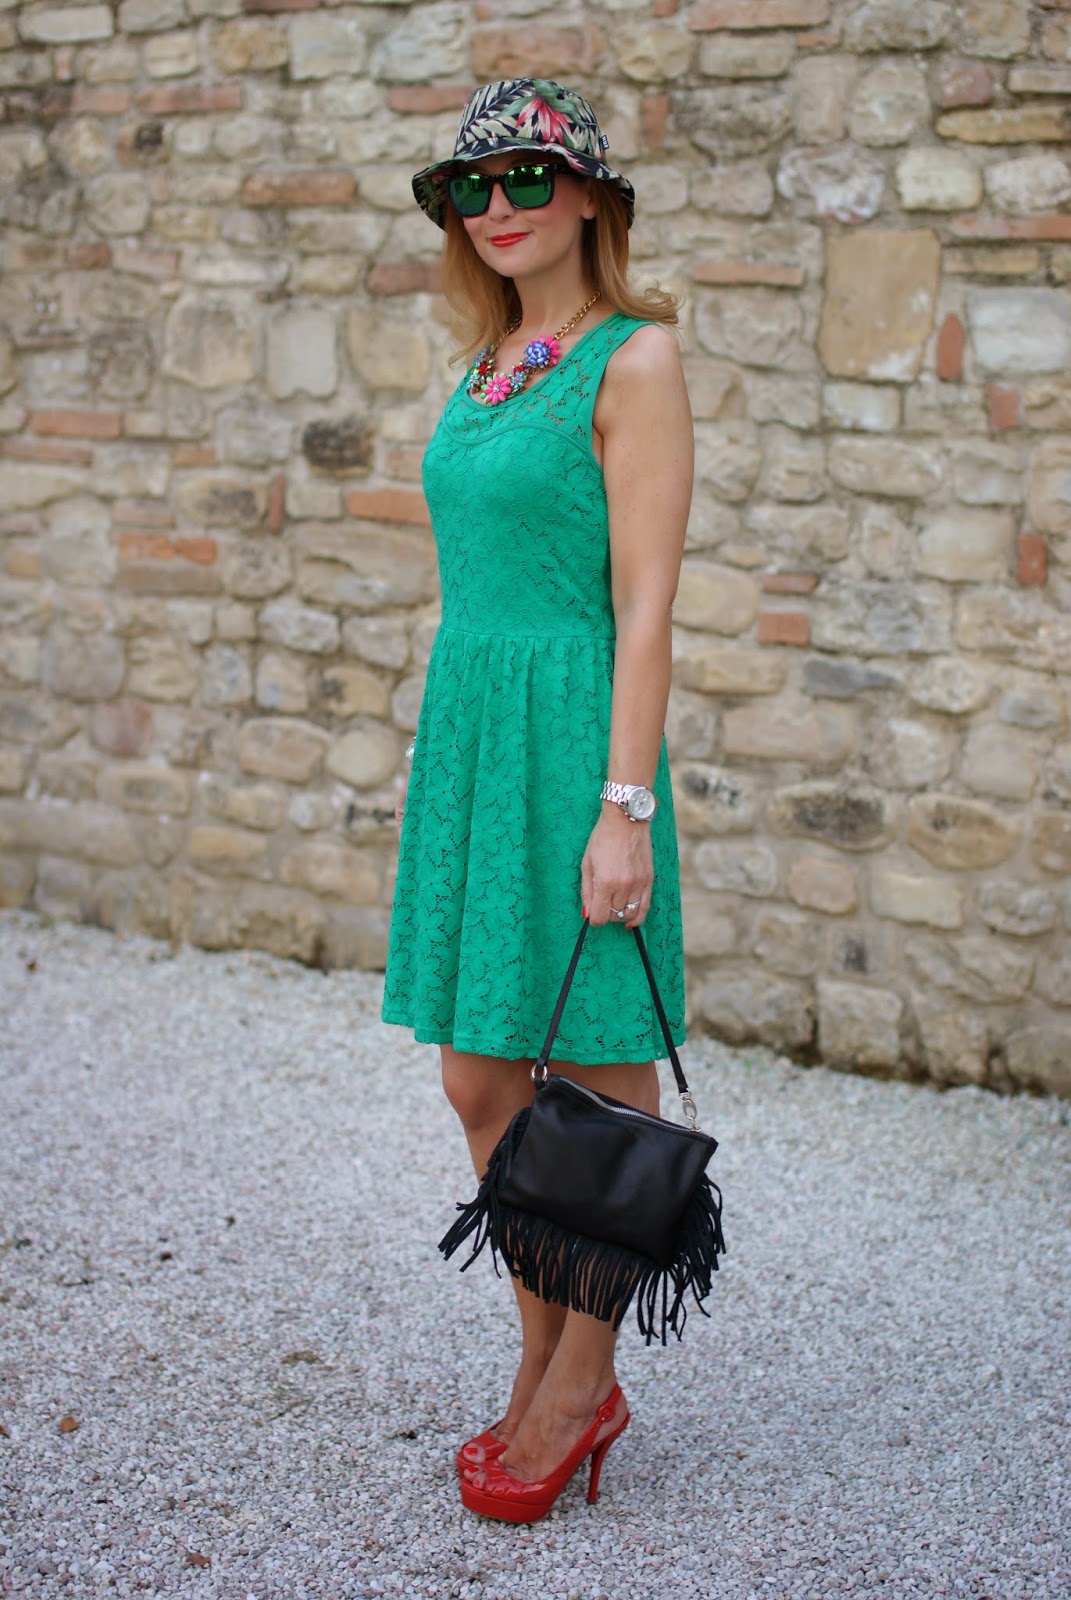 Morgan de toi green lace dress, no brand flowers necklace, fringed bag, tropical bob hat, oakley green sunglasses, Fashion and Cookies, fashion blogger